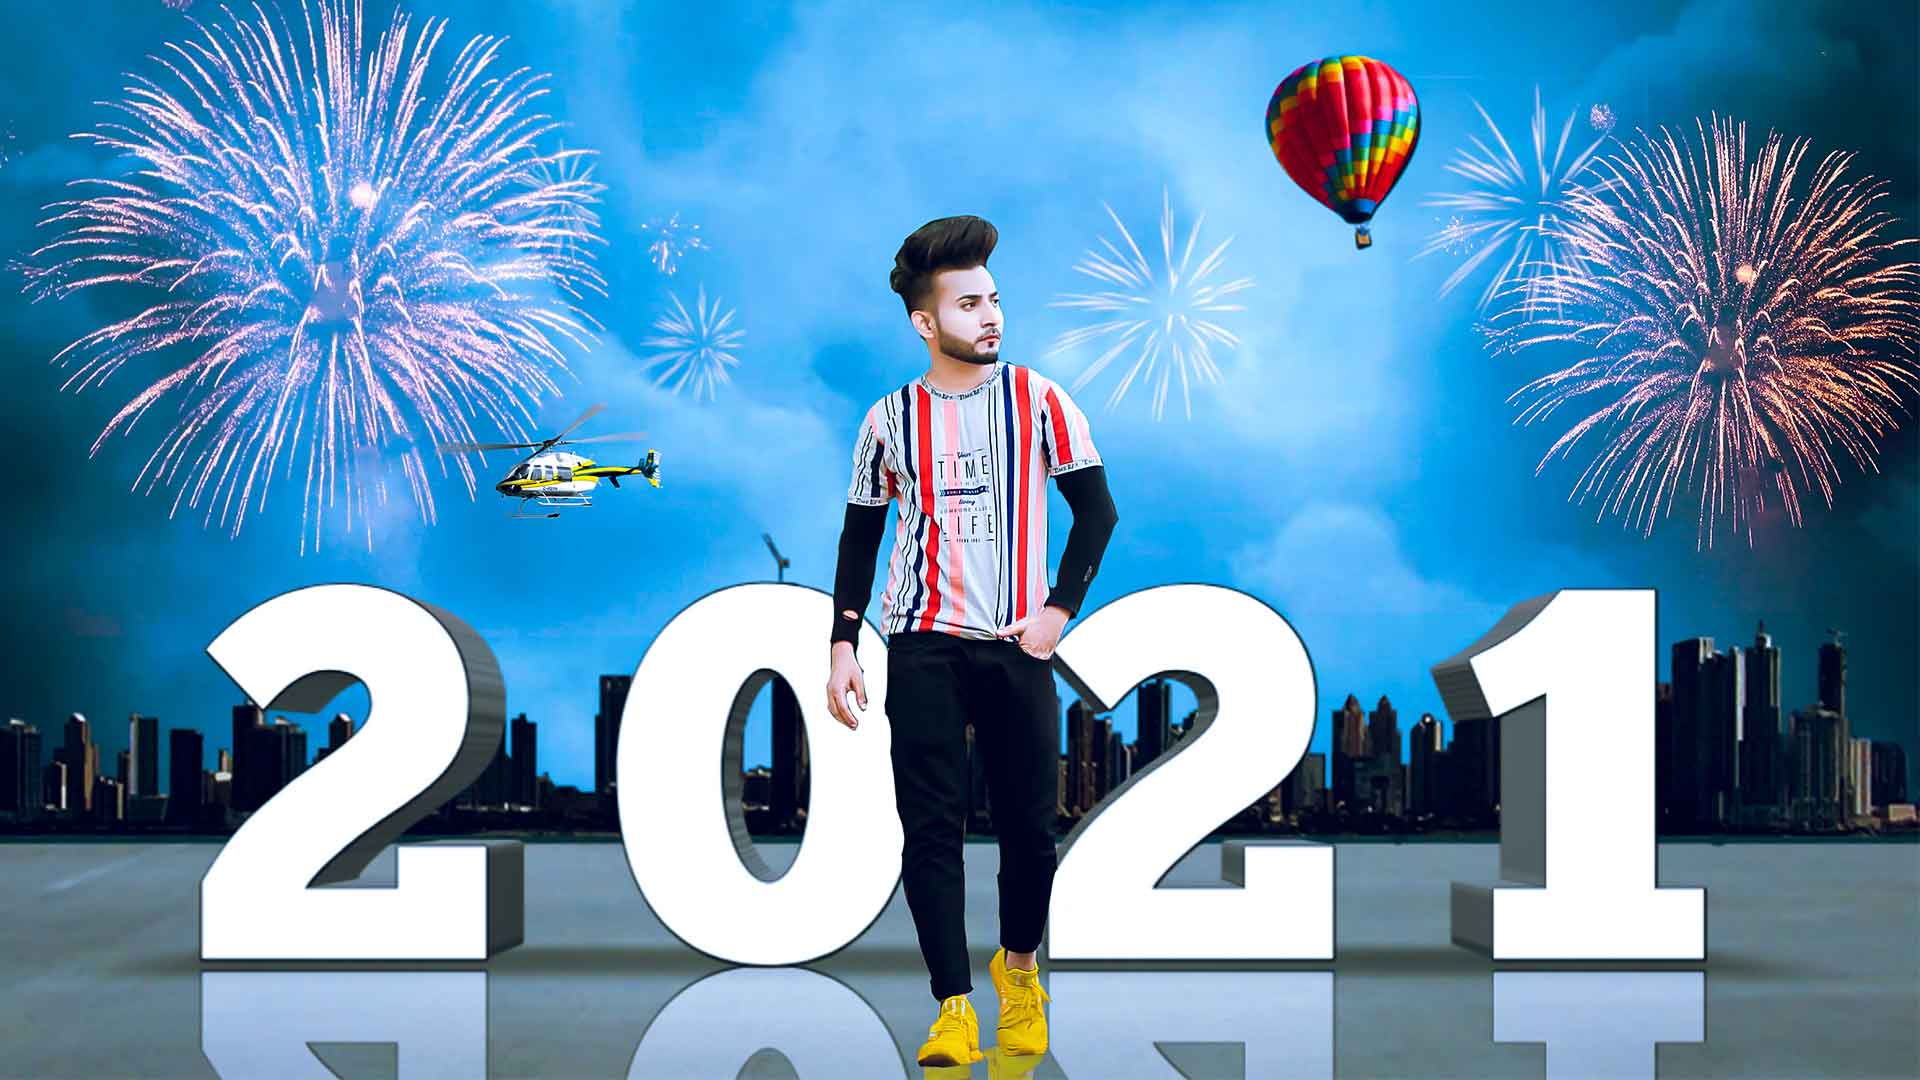 happy new year png text Archives - Picsart Photo Editing